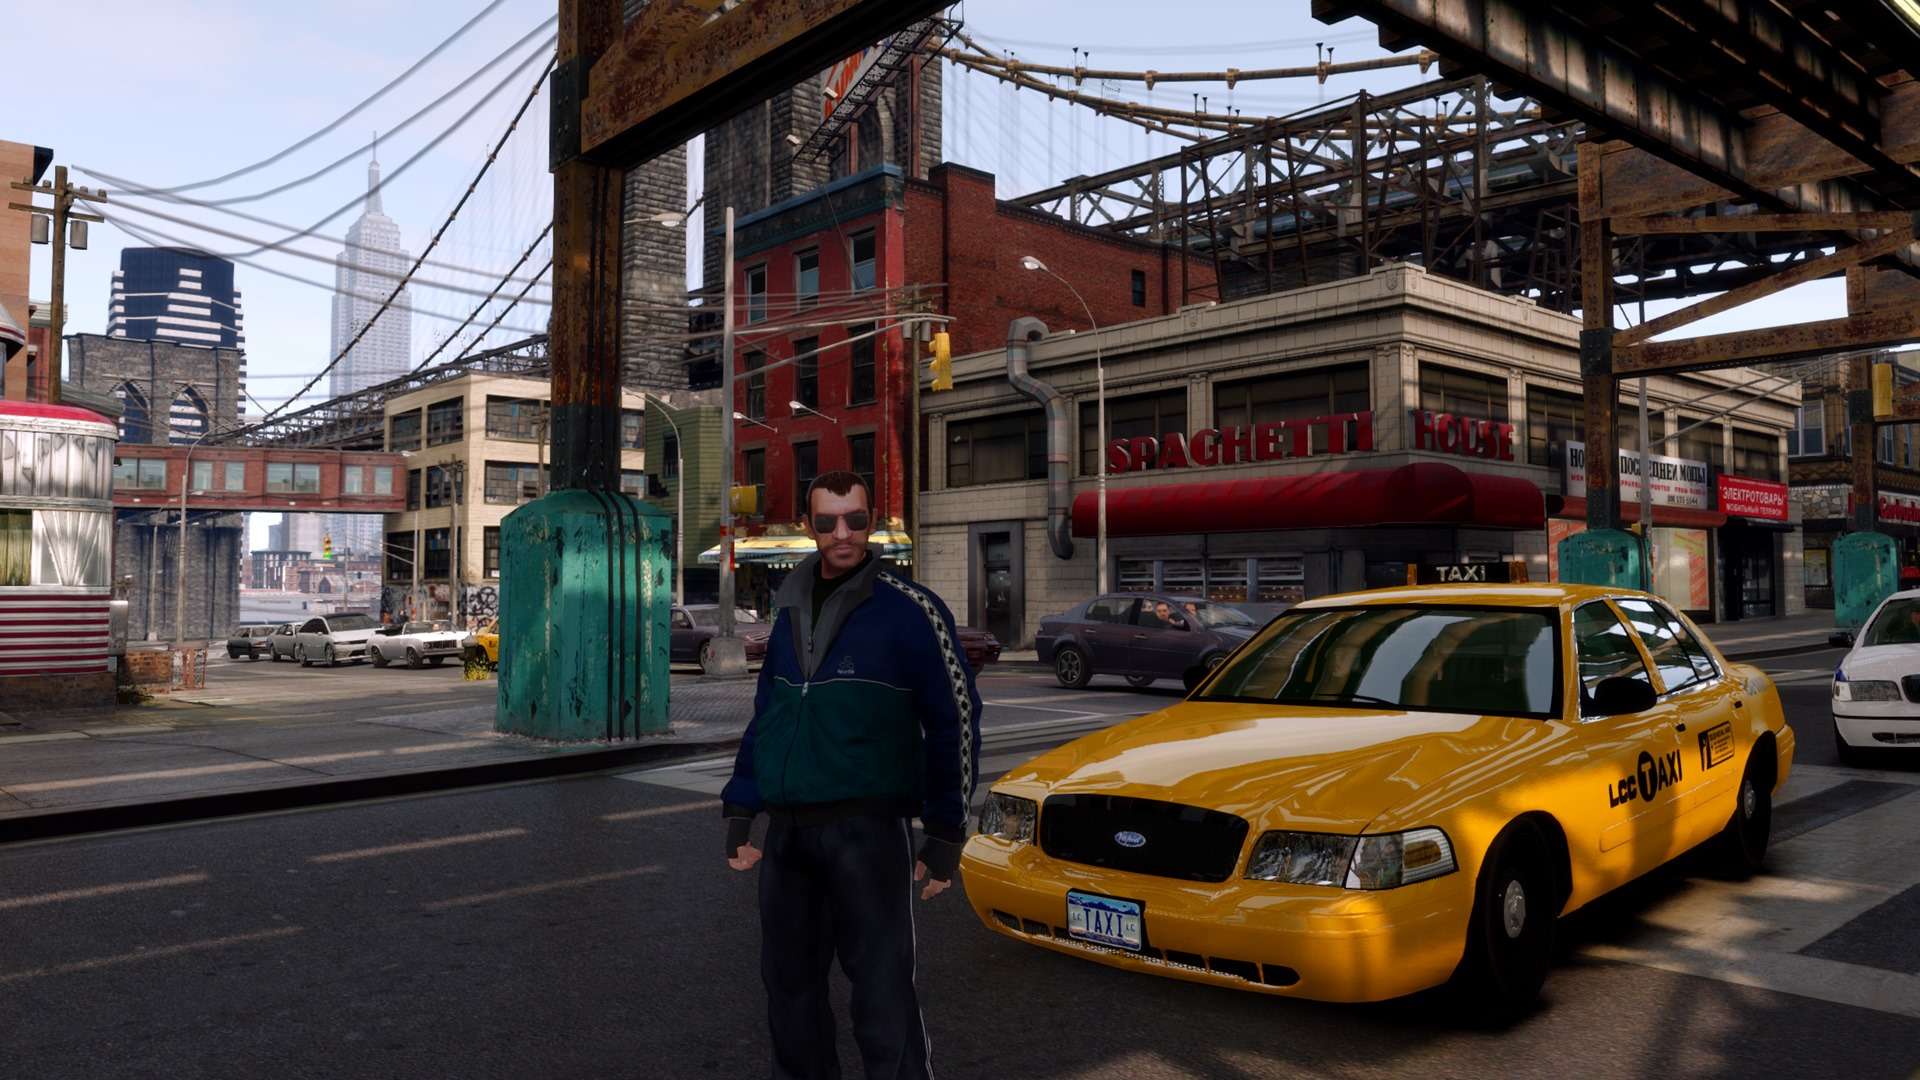 Gta 4 patch 1.0 7.0 download free